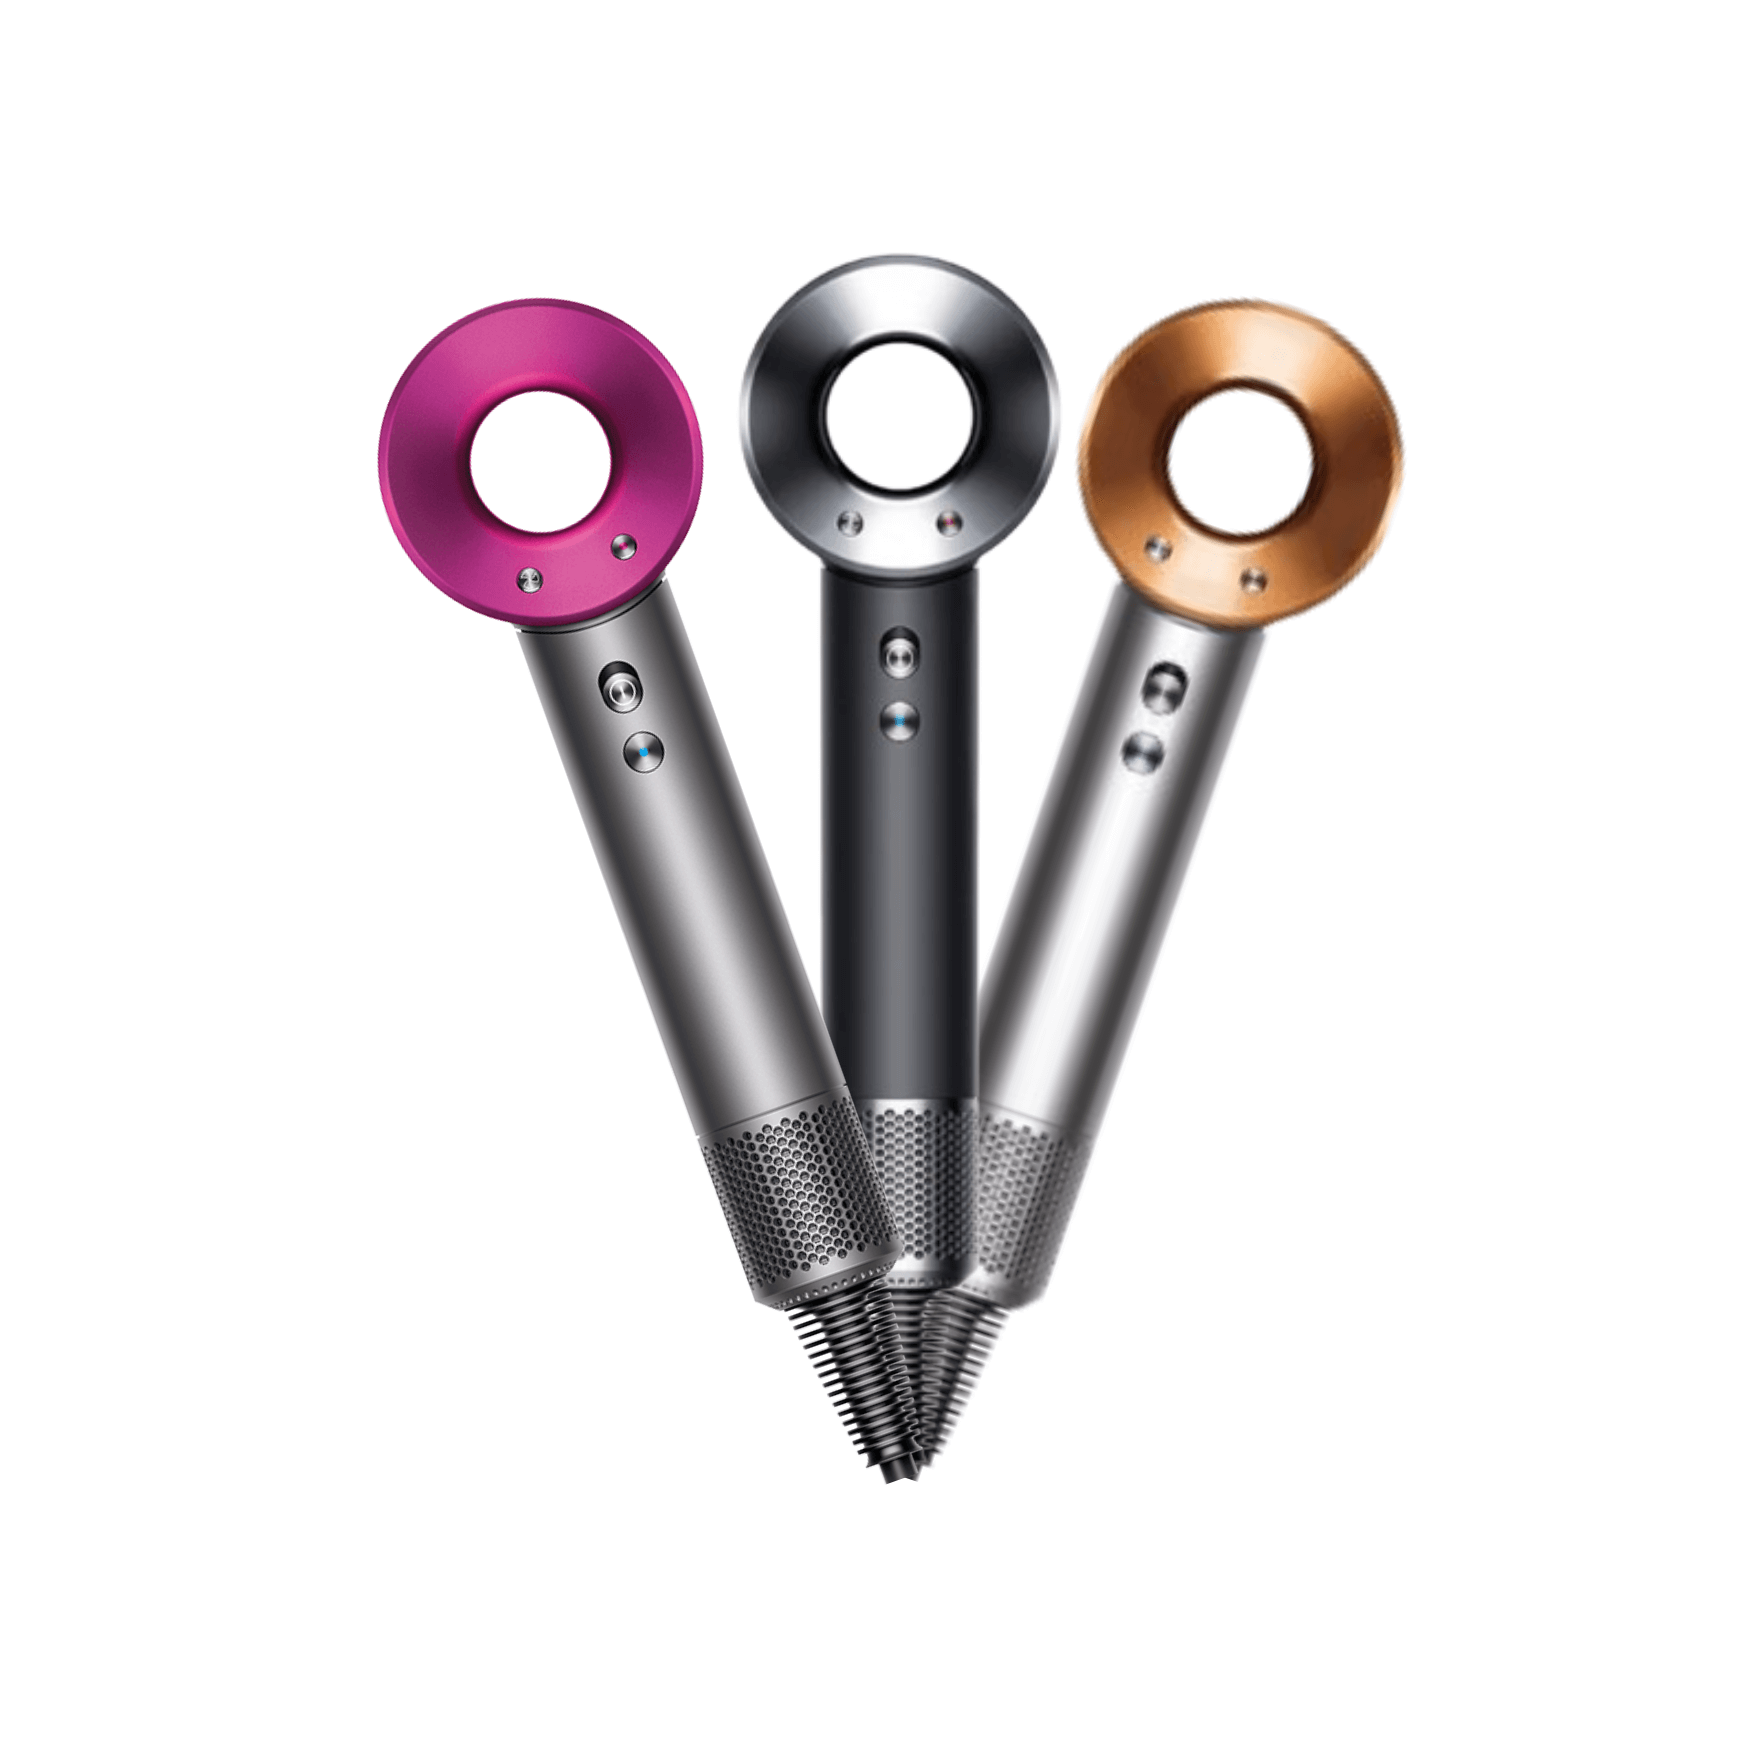 Dyson Supersonic ™ HD15 Hair Dryer with new Flyaway smoother